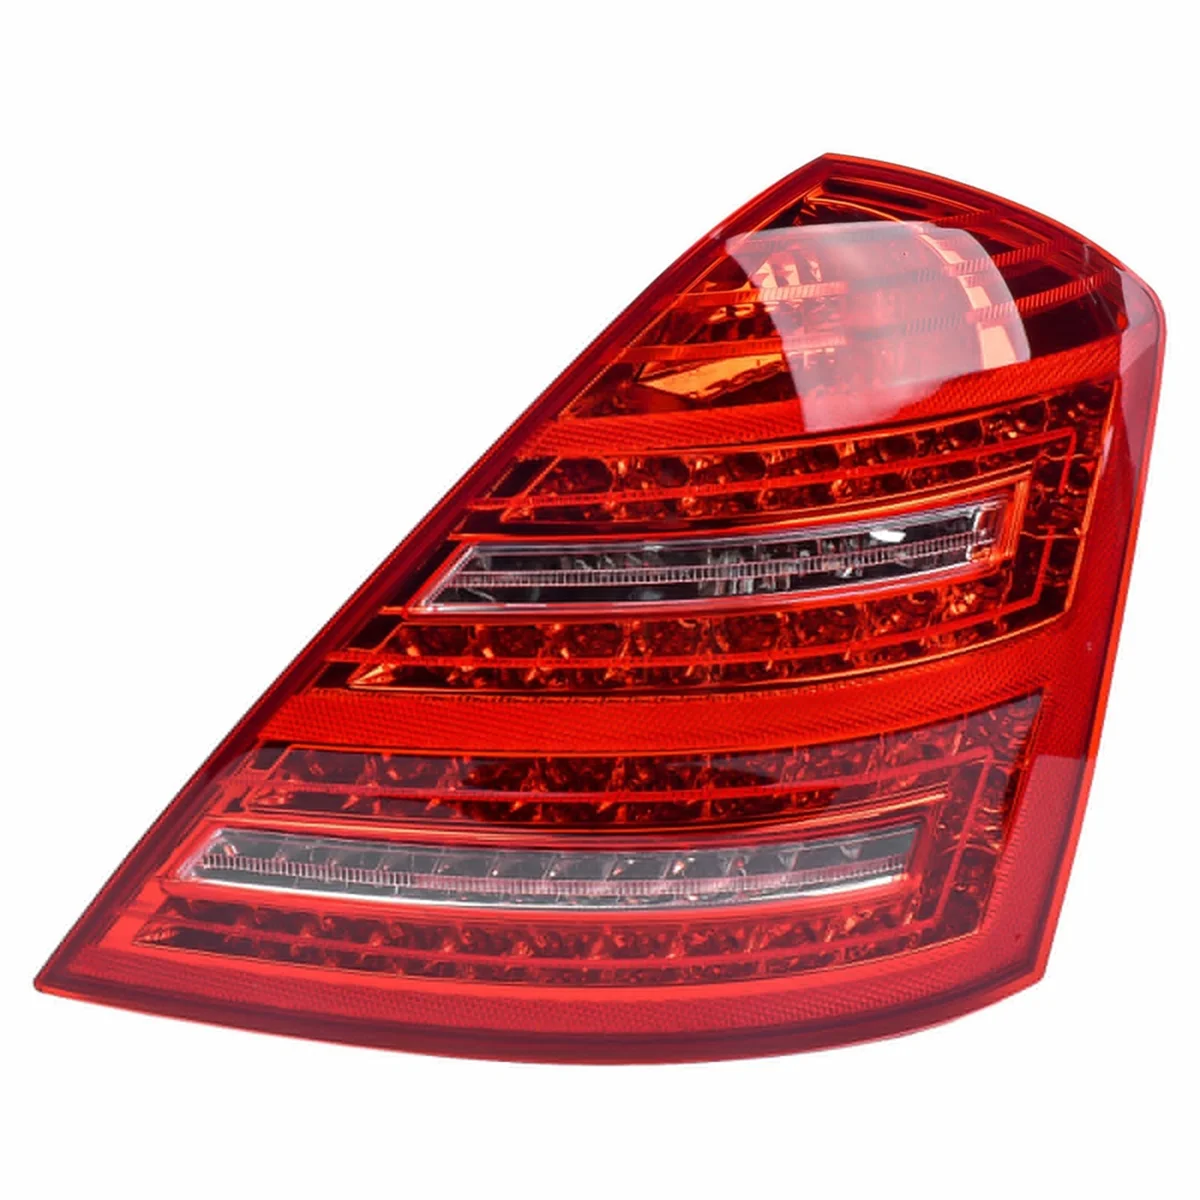 

Car Rear Combination Taillight Right for MERCEDES-BENZ S-CLASS W221 2005-2013 Brake Light Turn Signal Light 2218201464